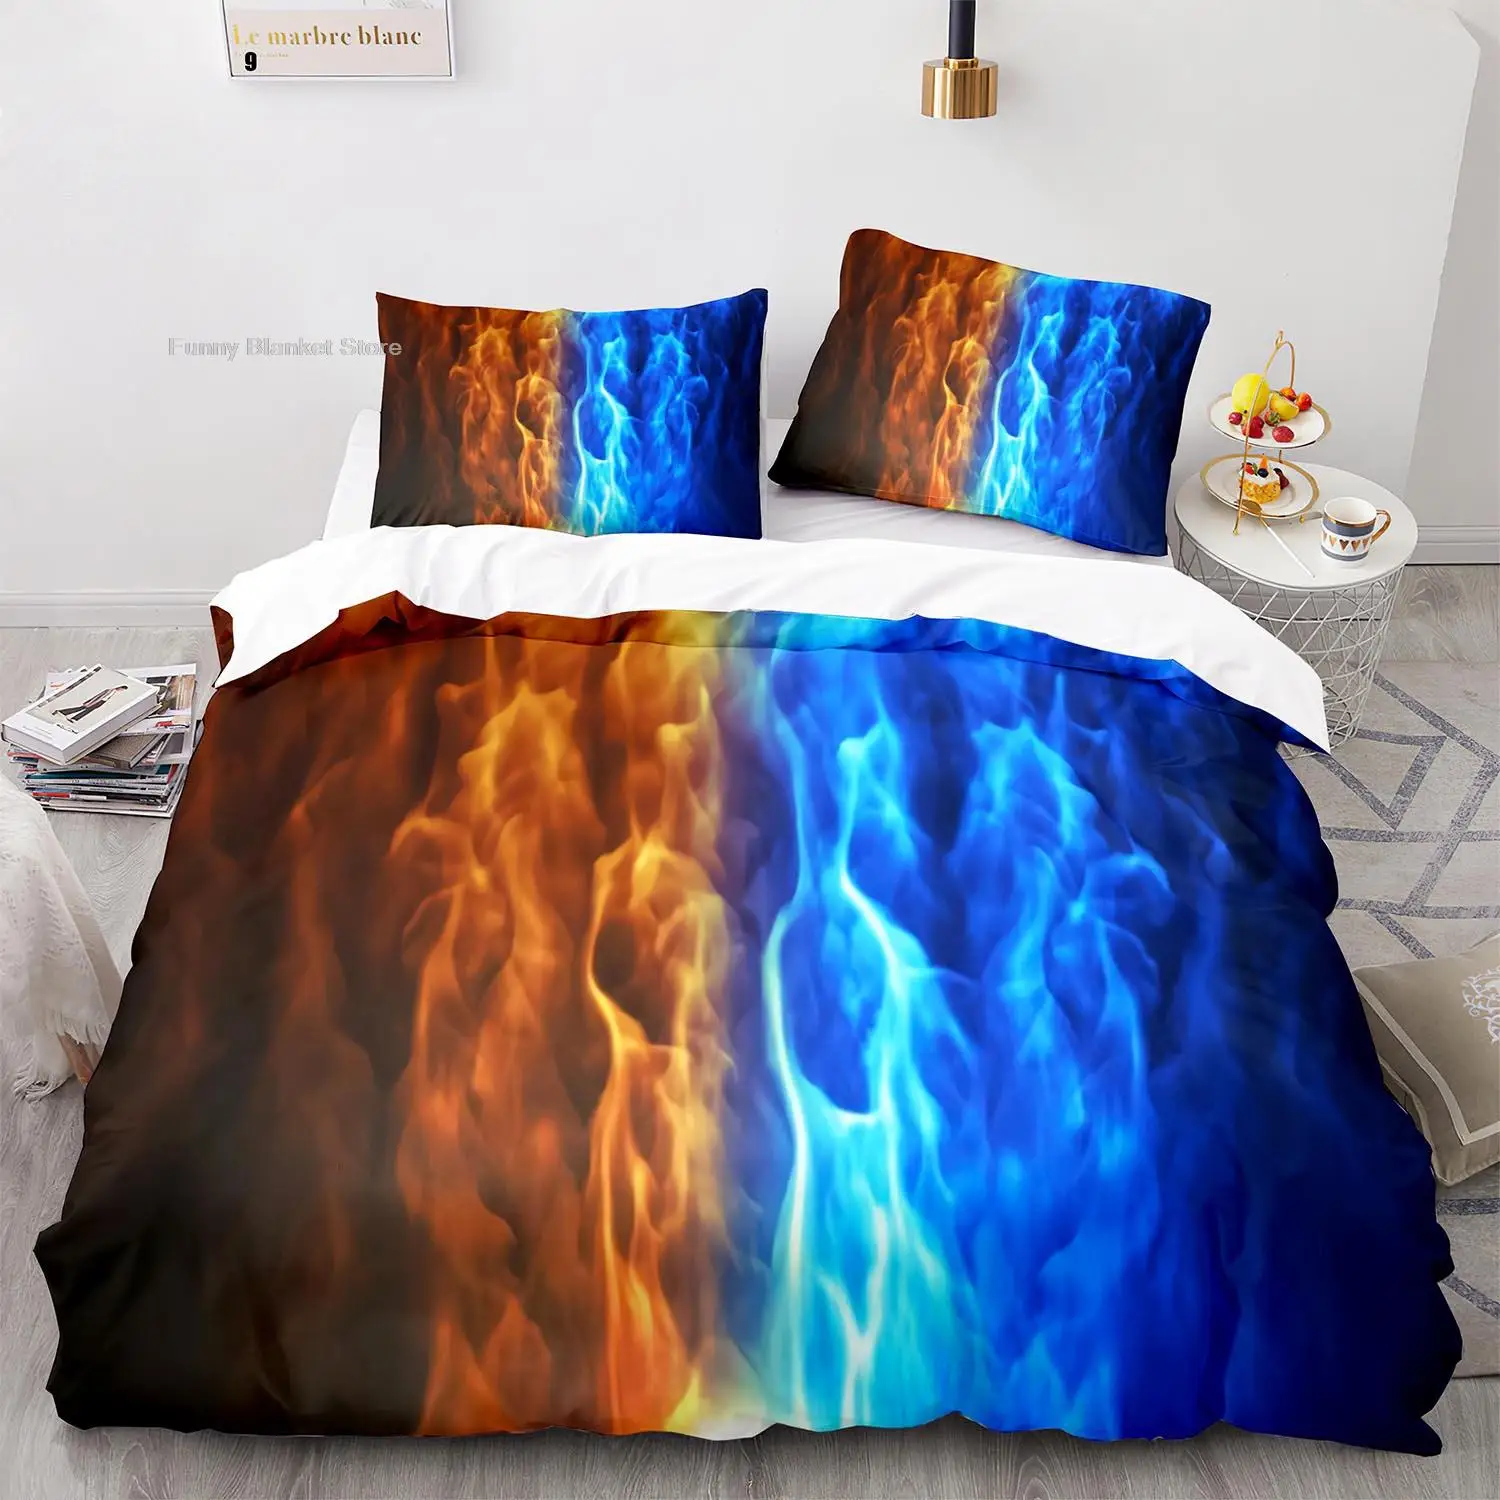 

Colorful Flame Bedding Set Single Twin Full Queen King Size Ice And Fire Blaze Bed Set Children Kid Bedroom постельное бельё 030